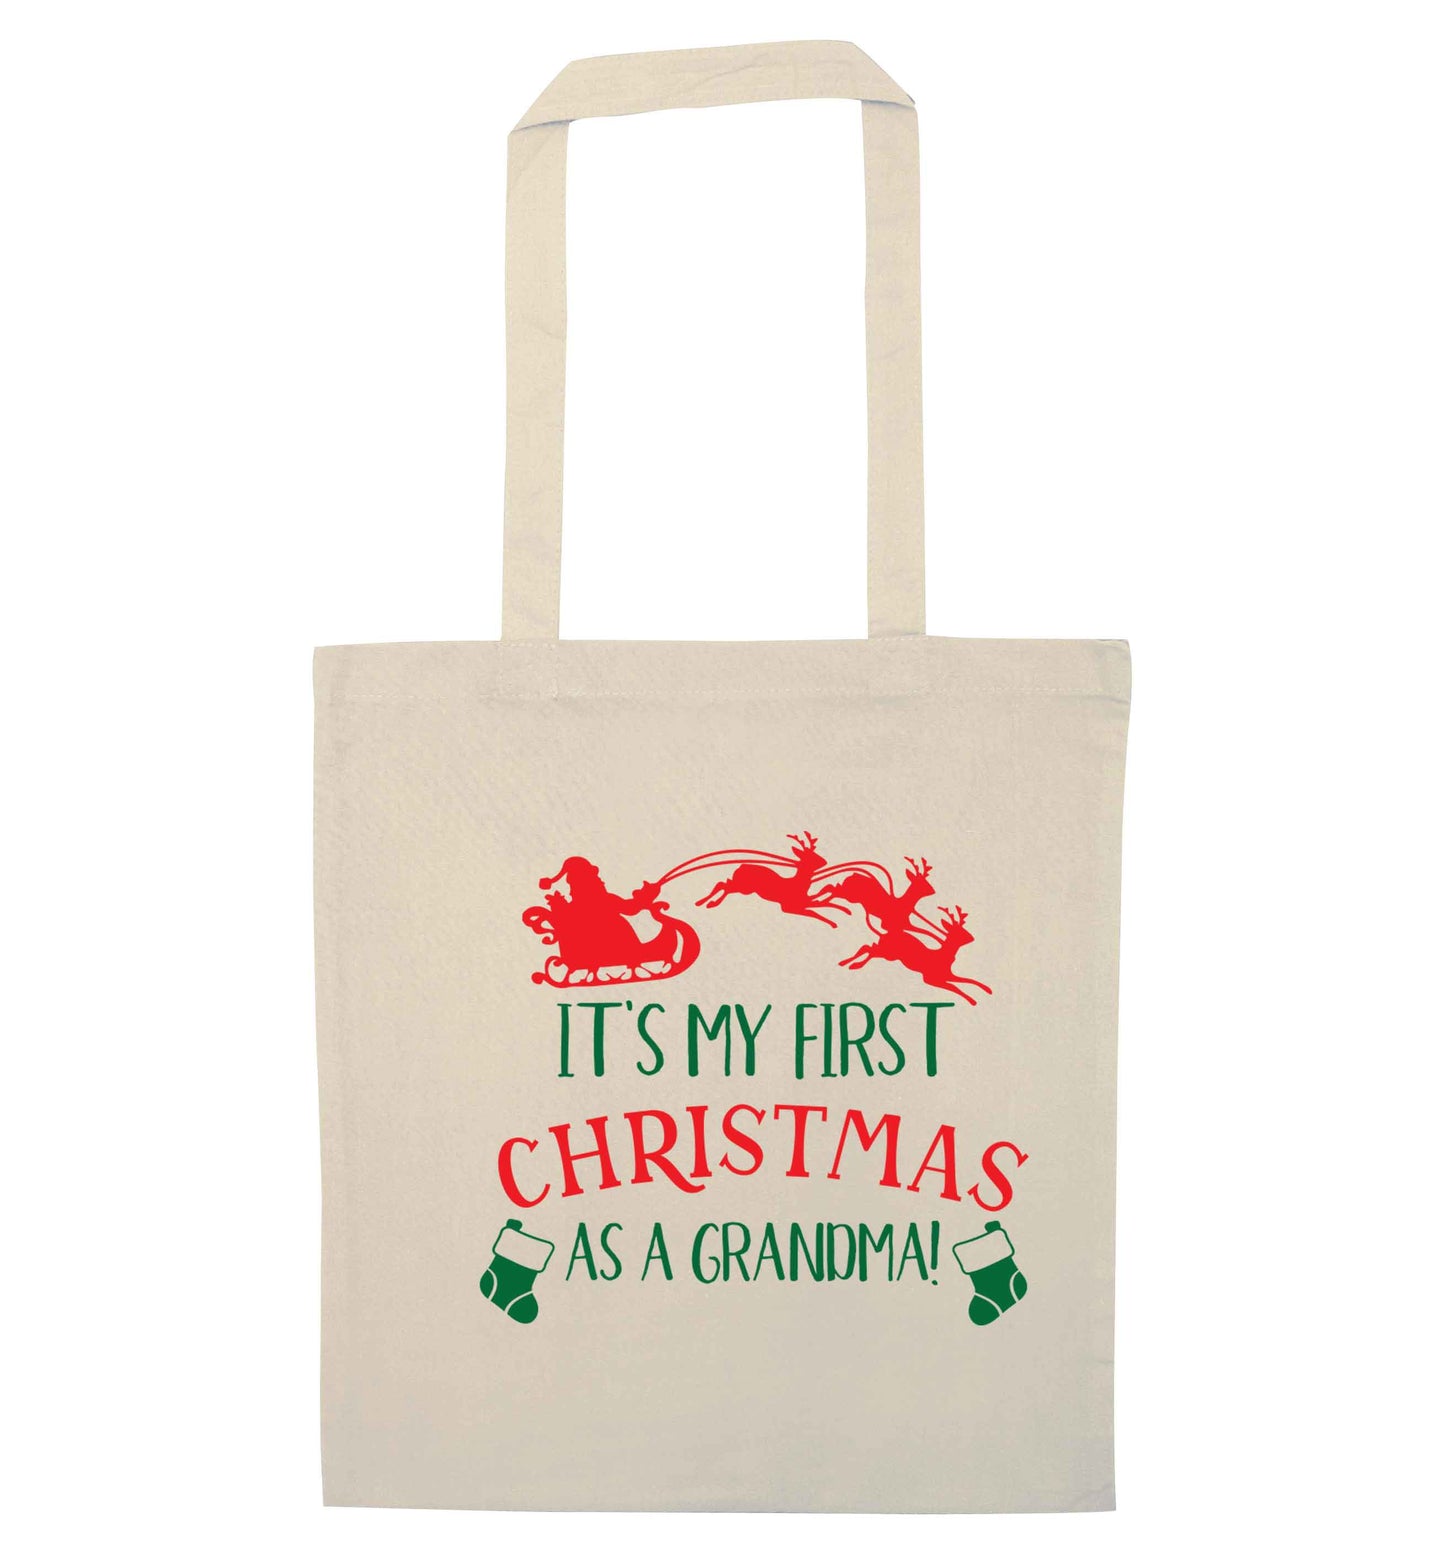 It's my first Christmas as a grandma! natural tote bag